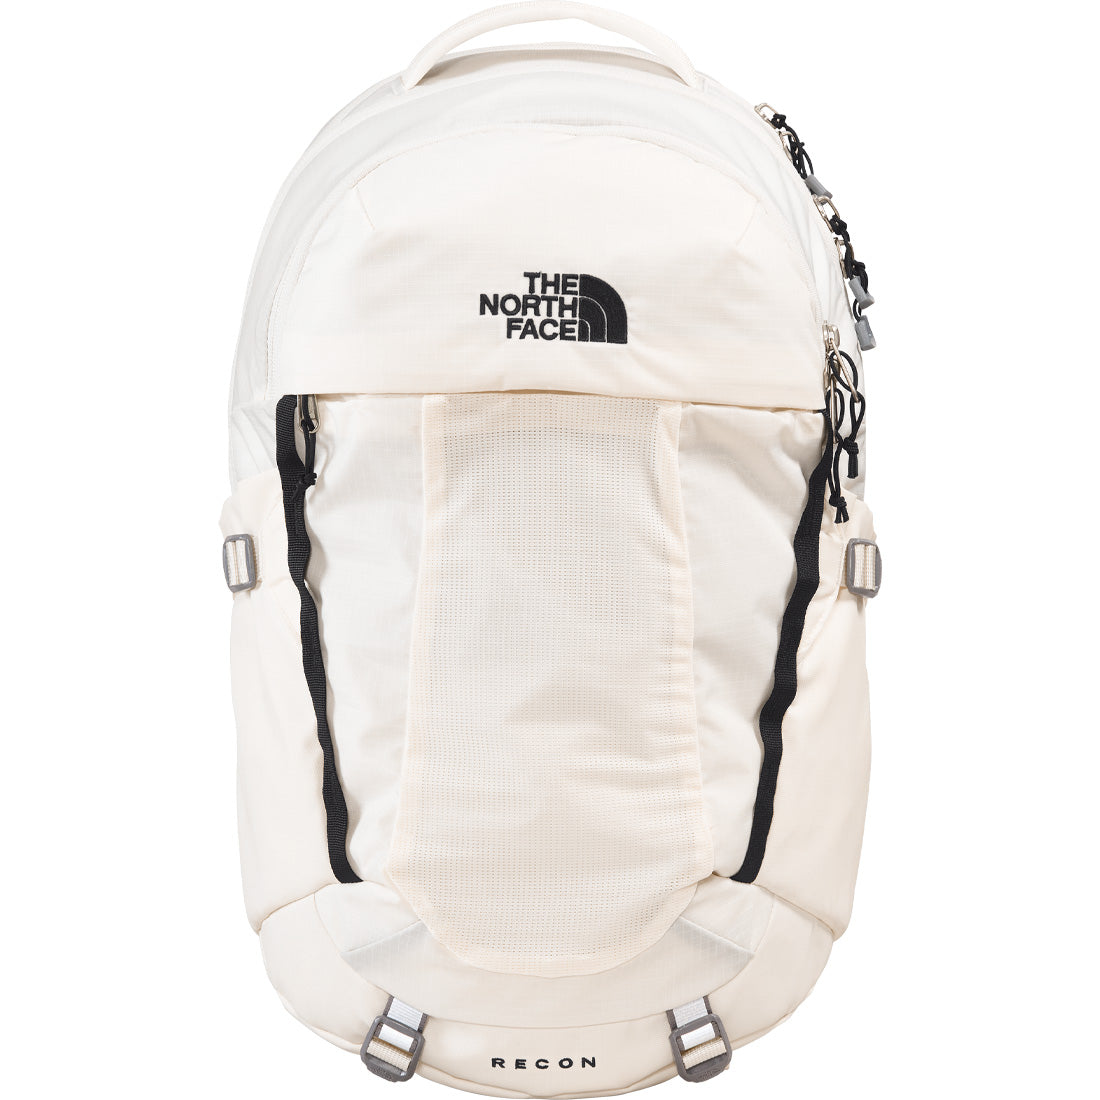 The North Face Recon Backpack - Women's